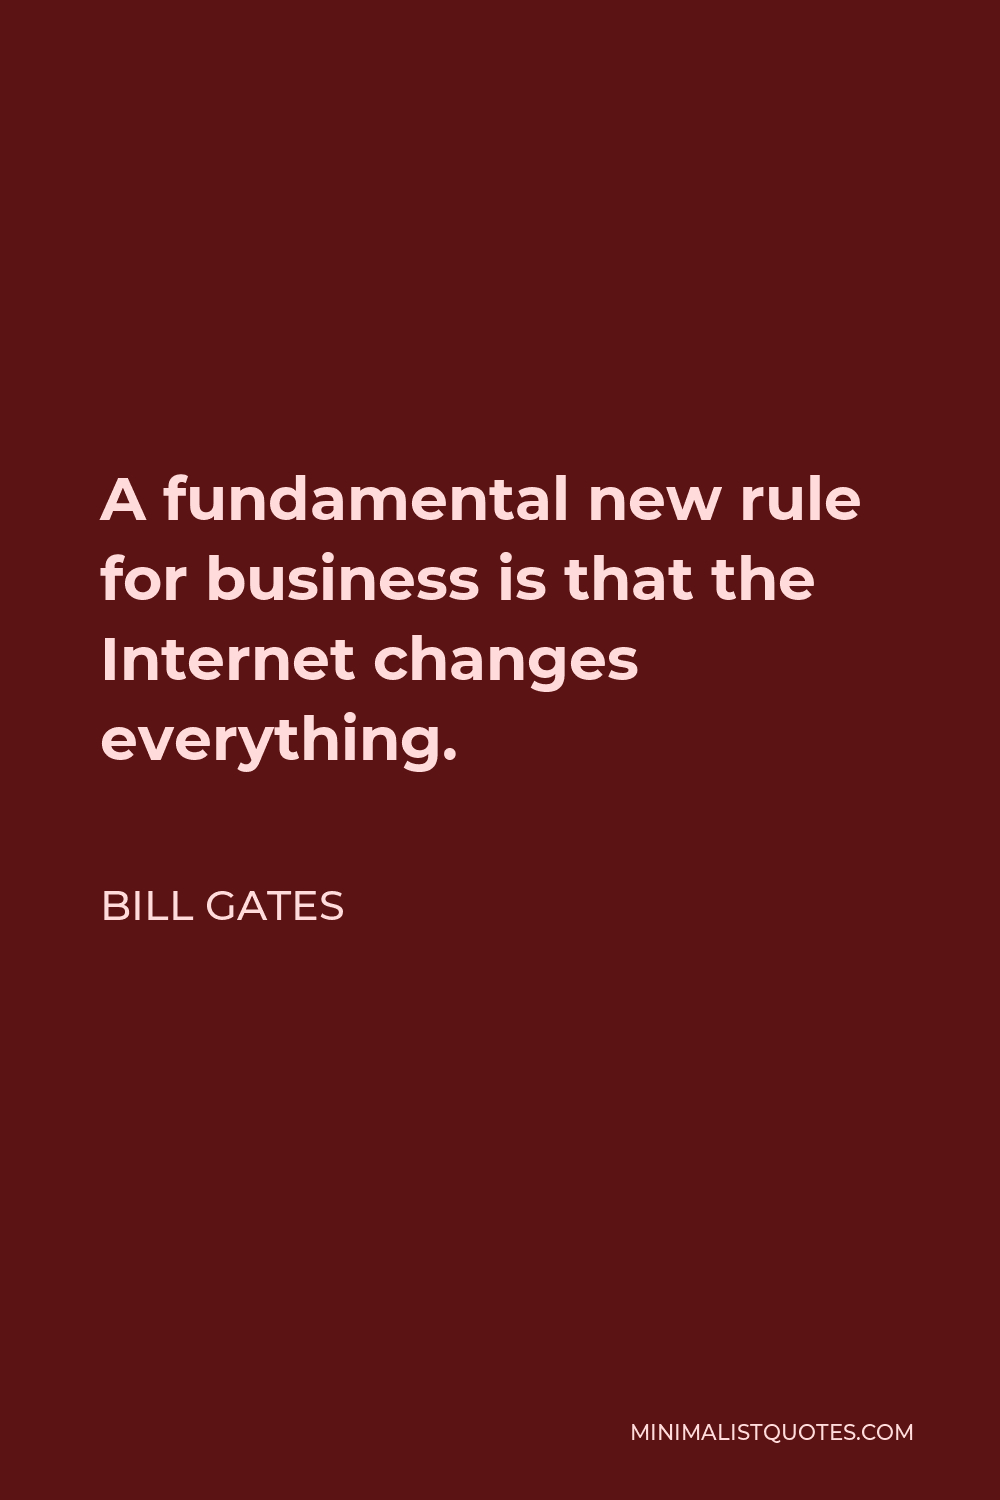 Bill Gates Quote - A fundamental new rule for business is that the Internet changes everything.